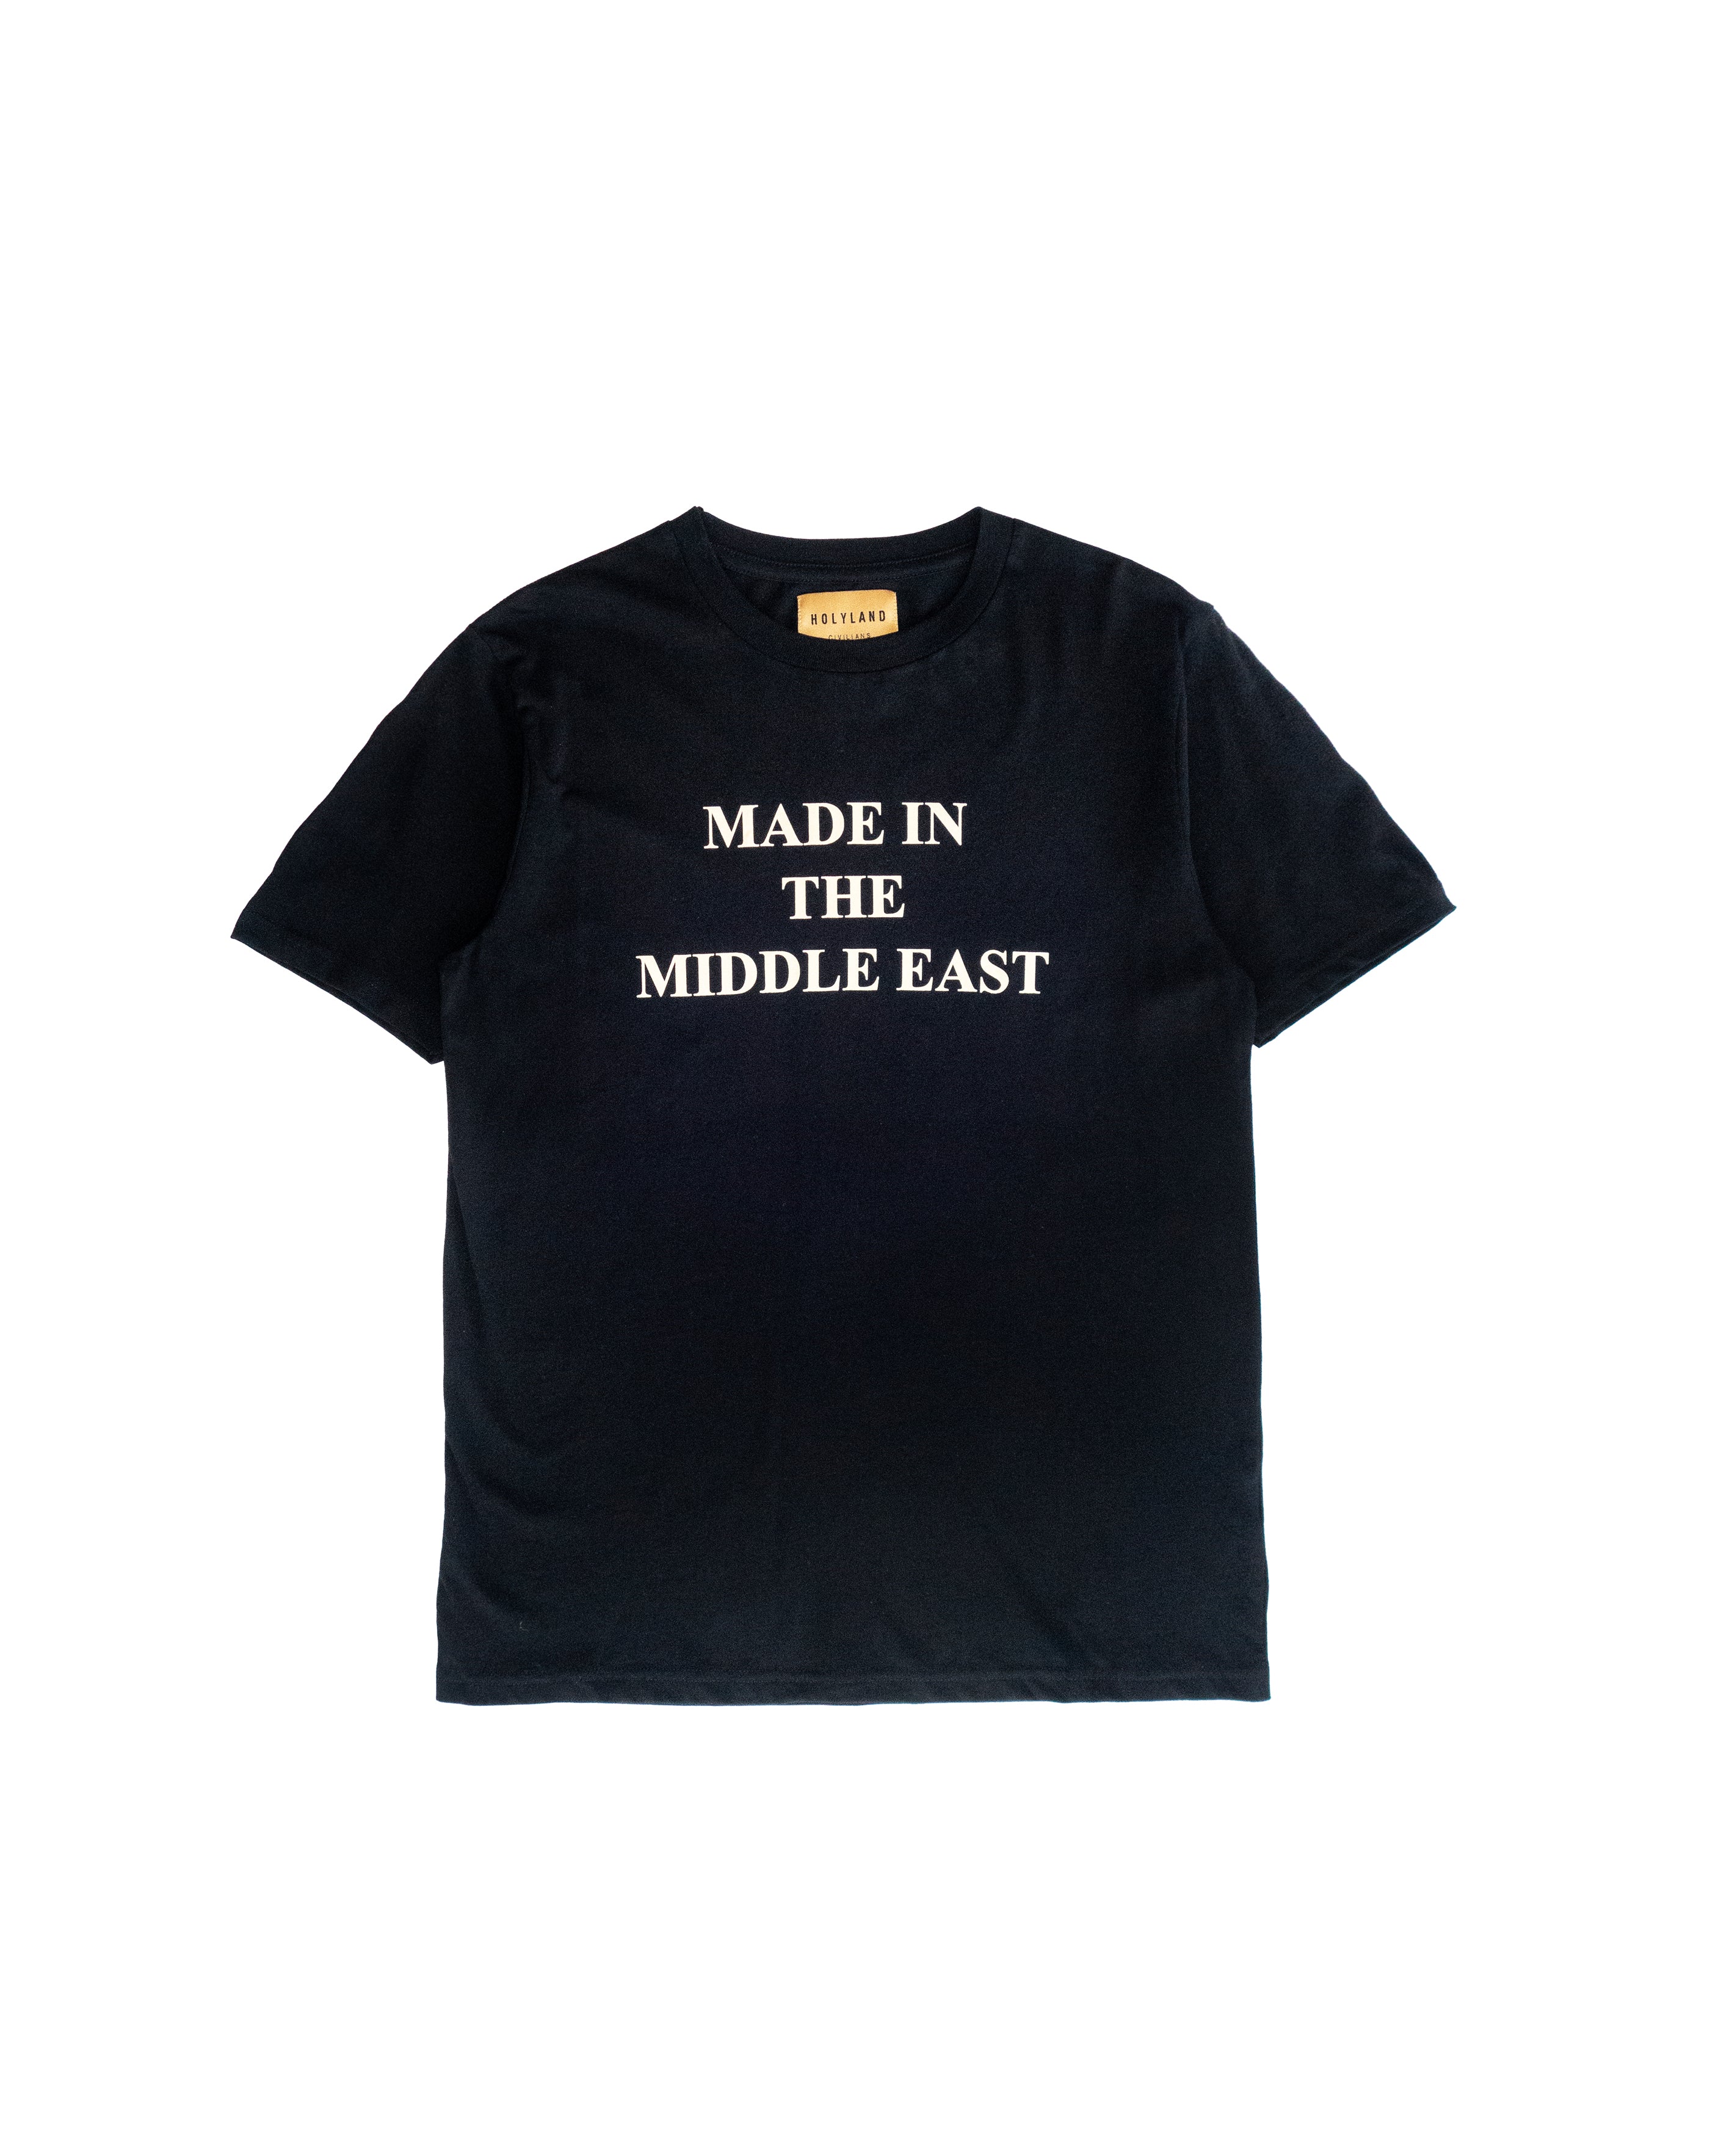 MADE IN THE MIDDLE EAST T-SHIRT HOLYLAND CIVILIANS IL